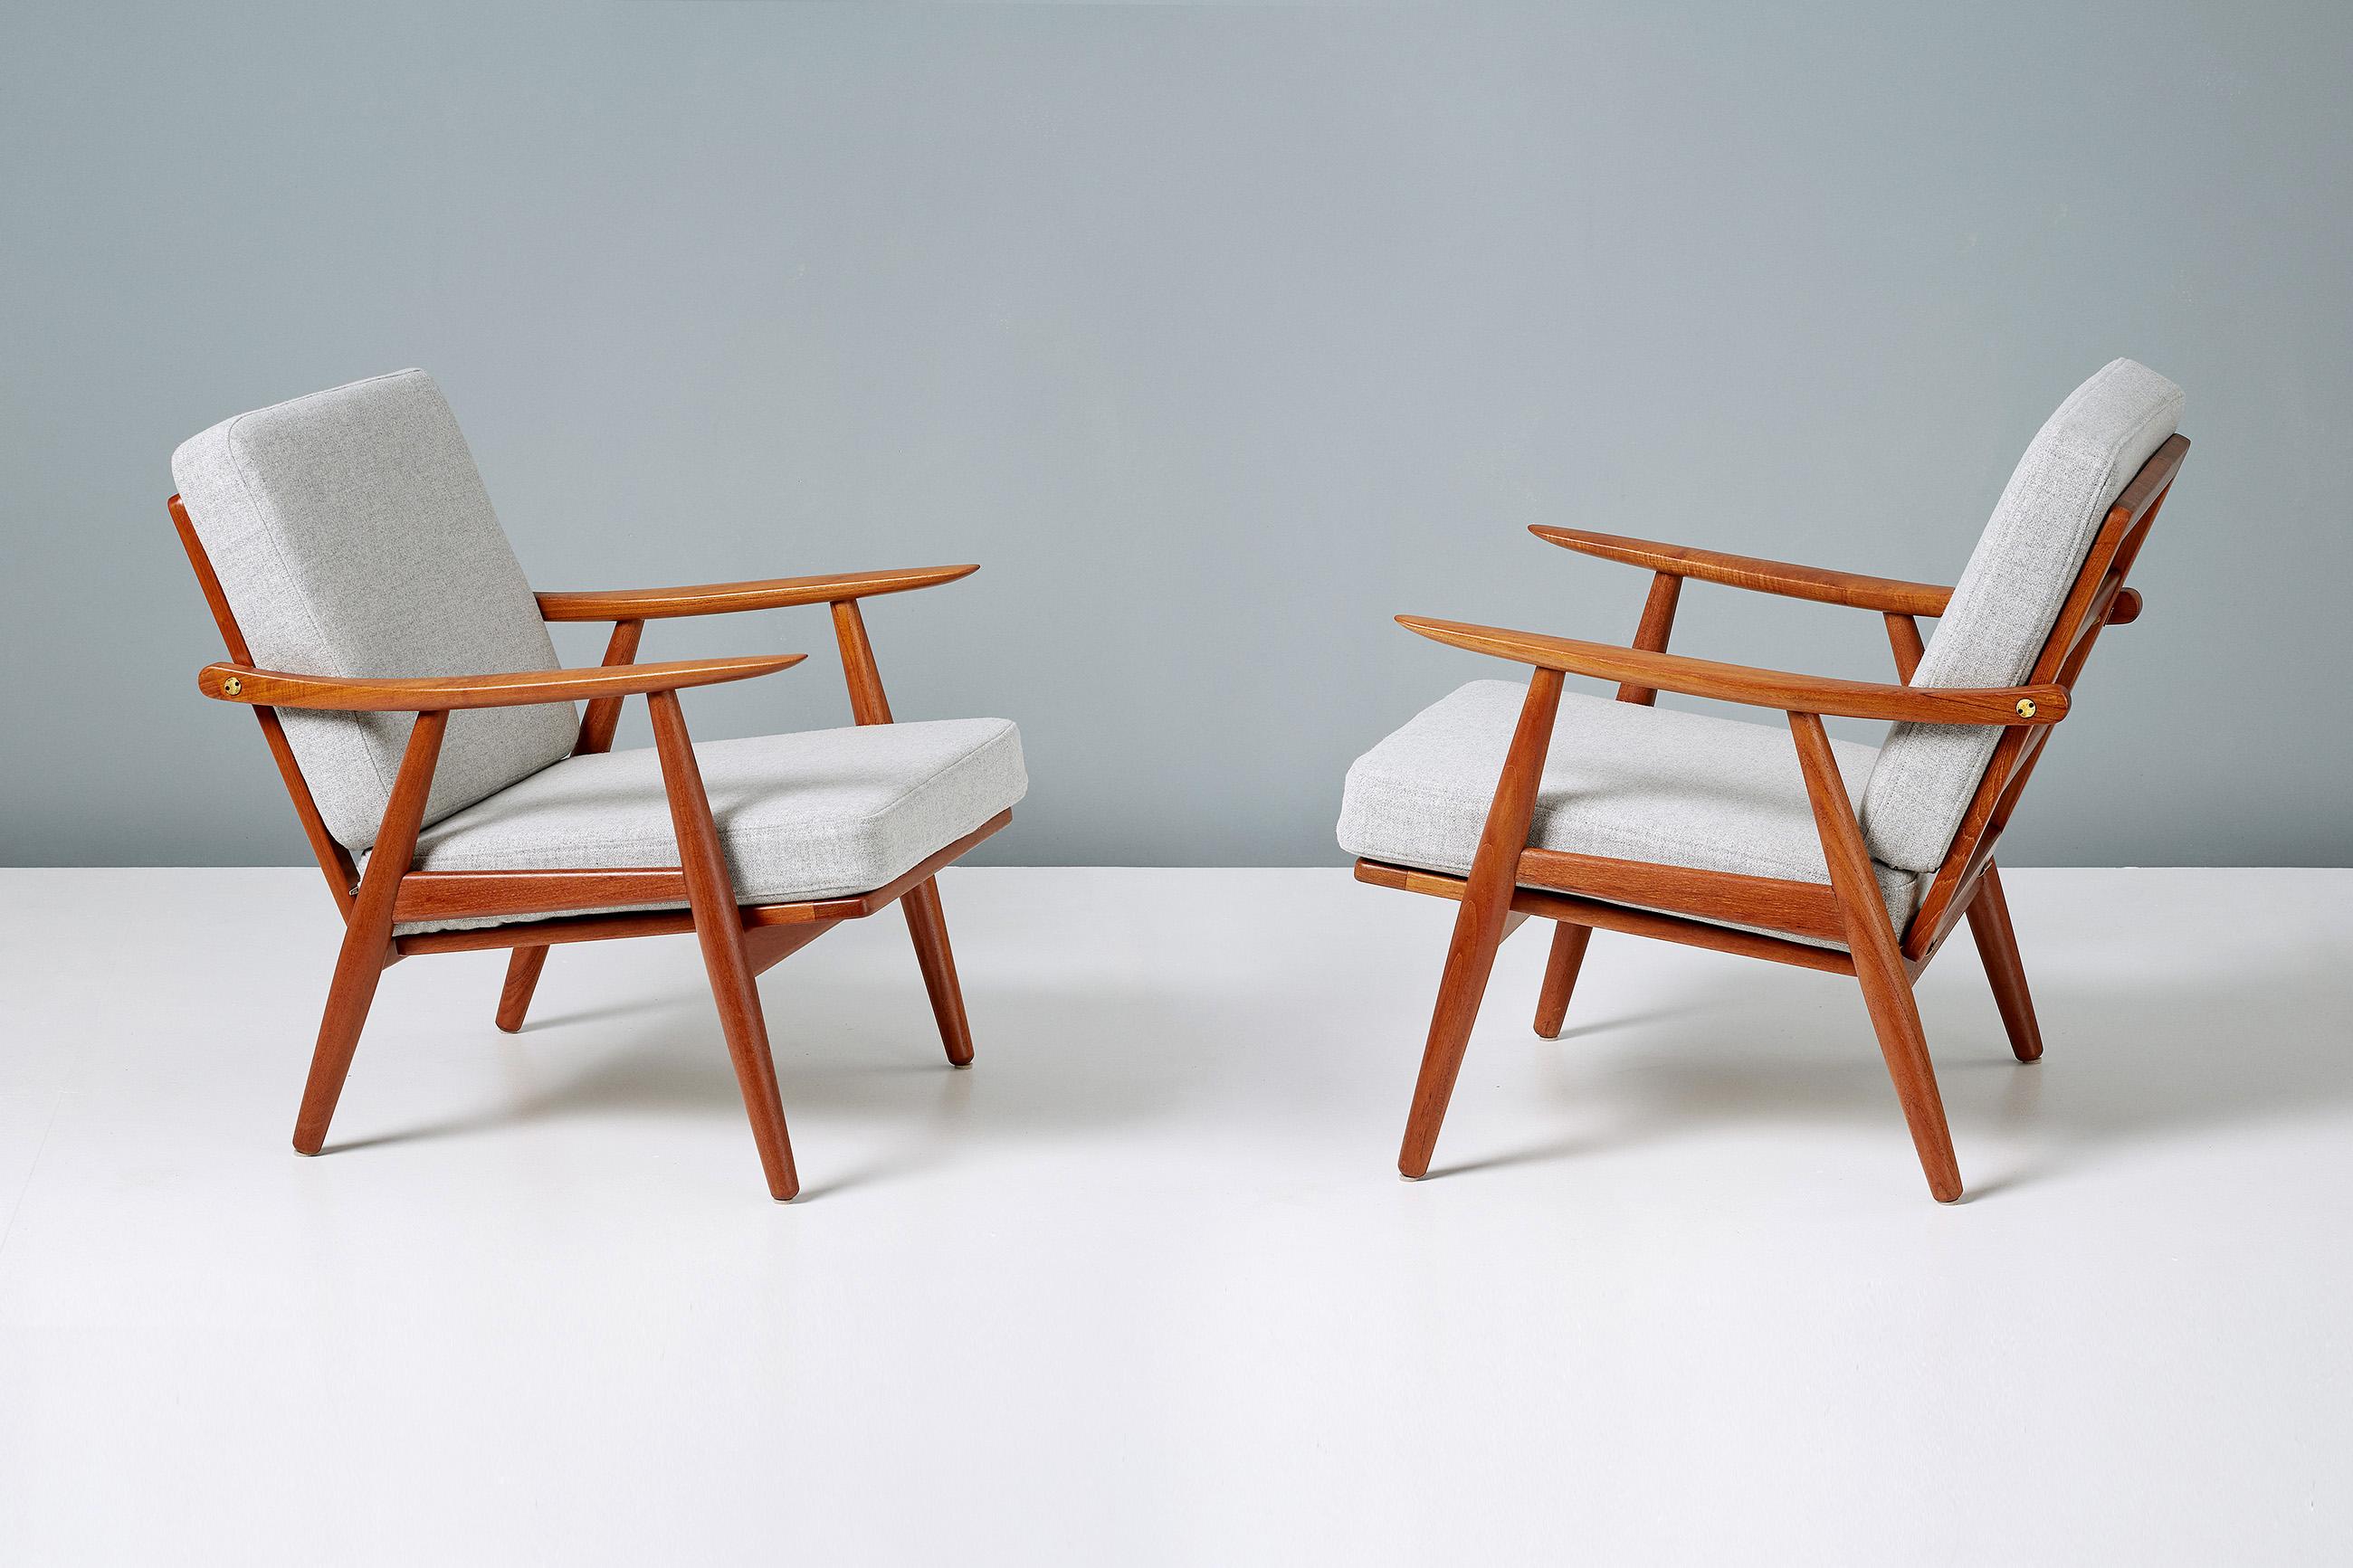 Hans Wegner GE-270 Pair of Lounge Chairs, 1956 In Excellent Condition For Sale In London, GB